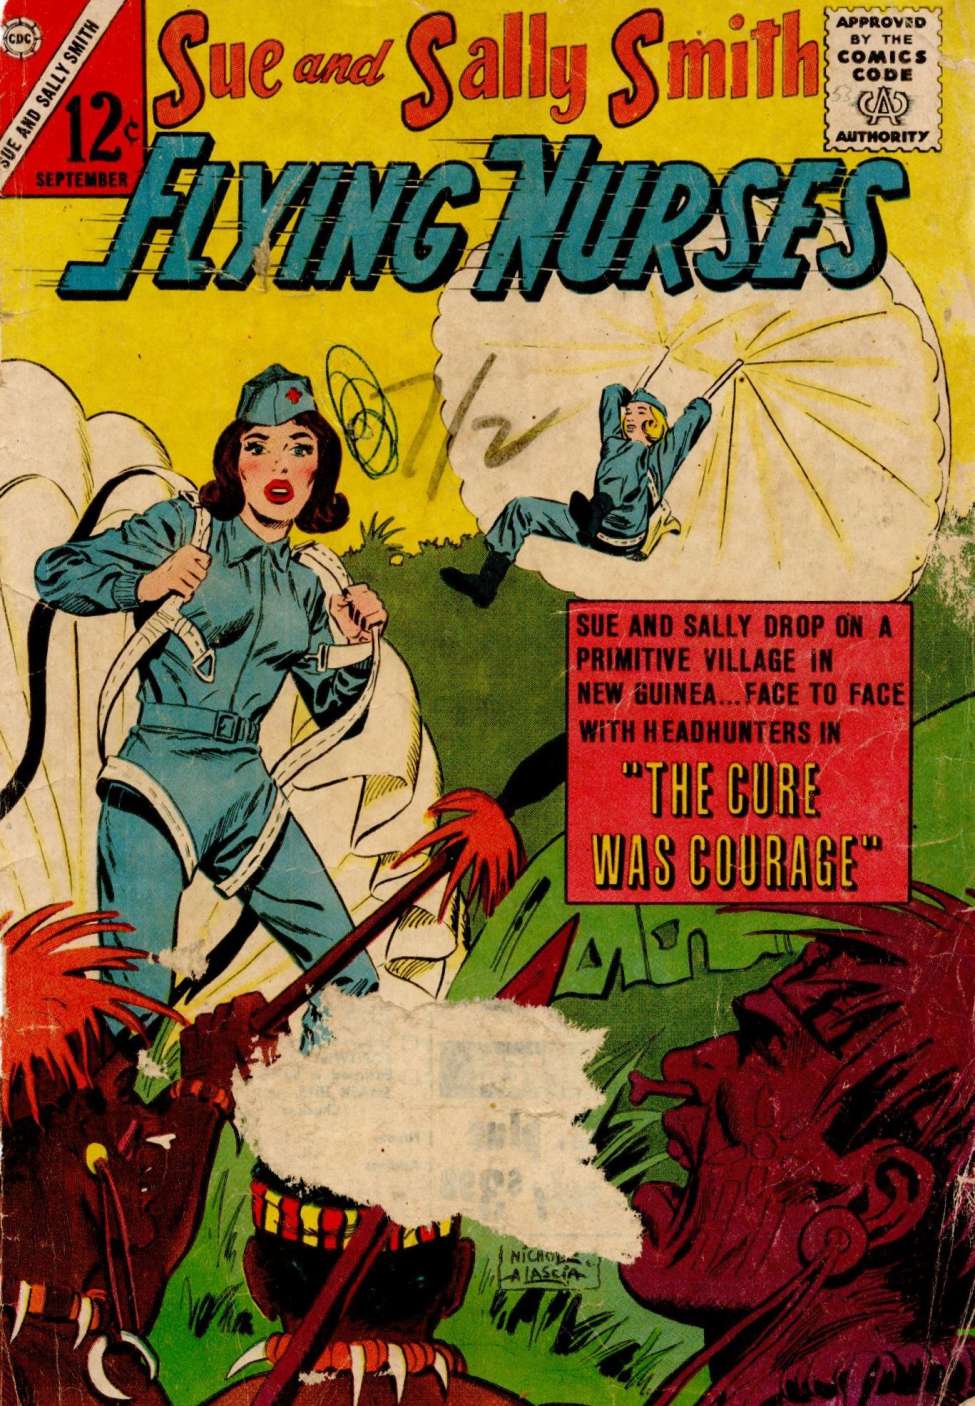 Book Cover For Sue and Sally Smith, Flying Nurses 53